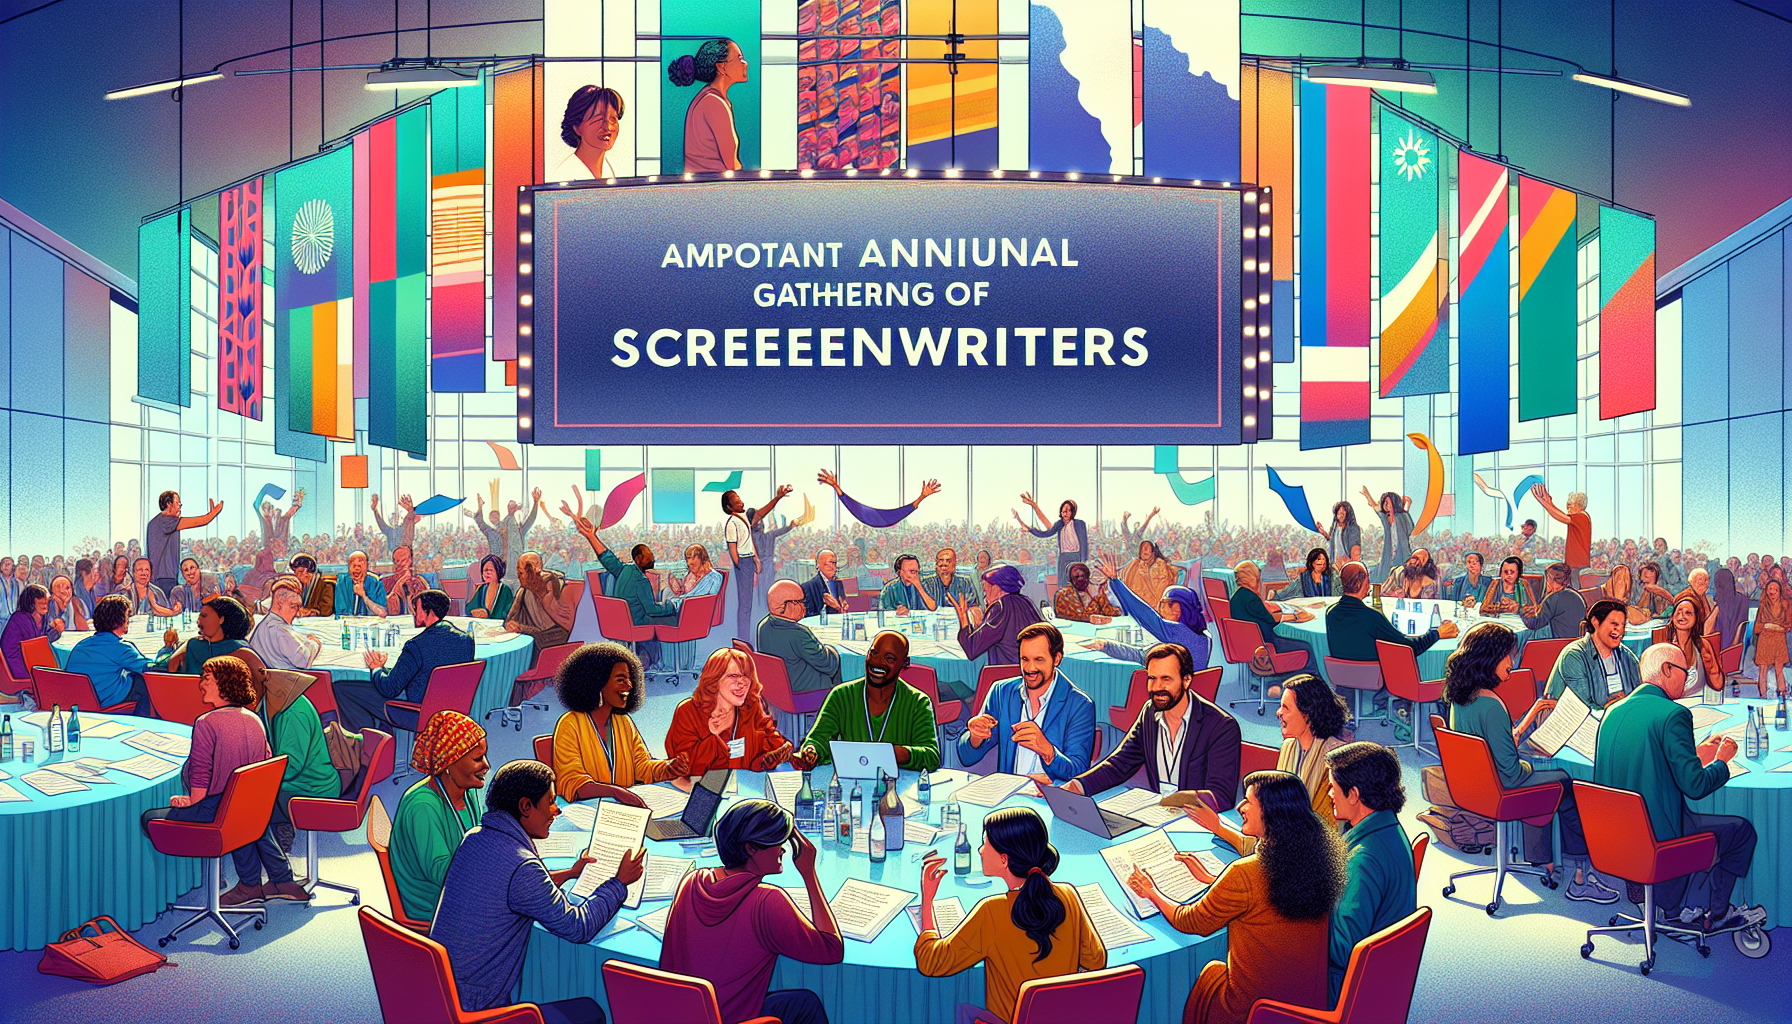 An artist's depiction of a bustling conference room filled with diverse screenwriters from around the world, engaging in animated discussions, sharing scripts, and brainstorming ideas under a large ba